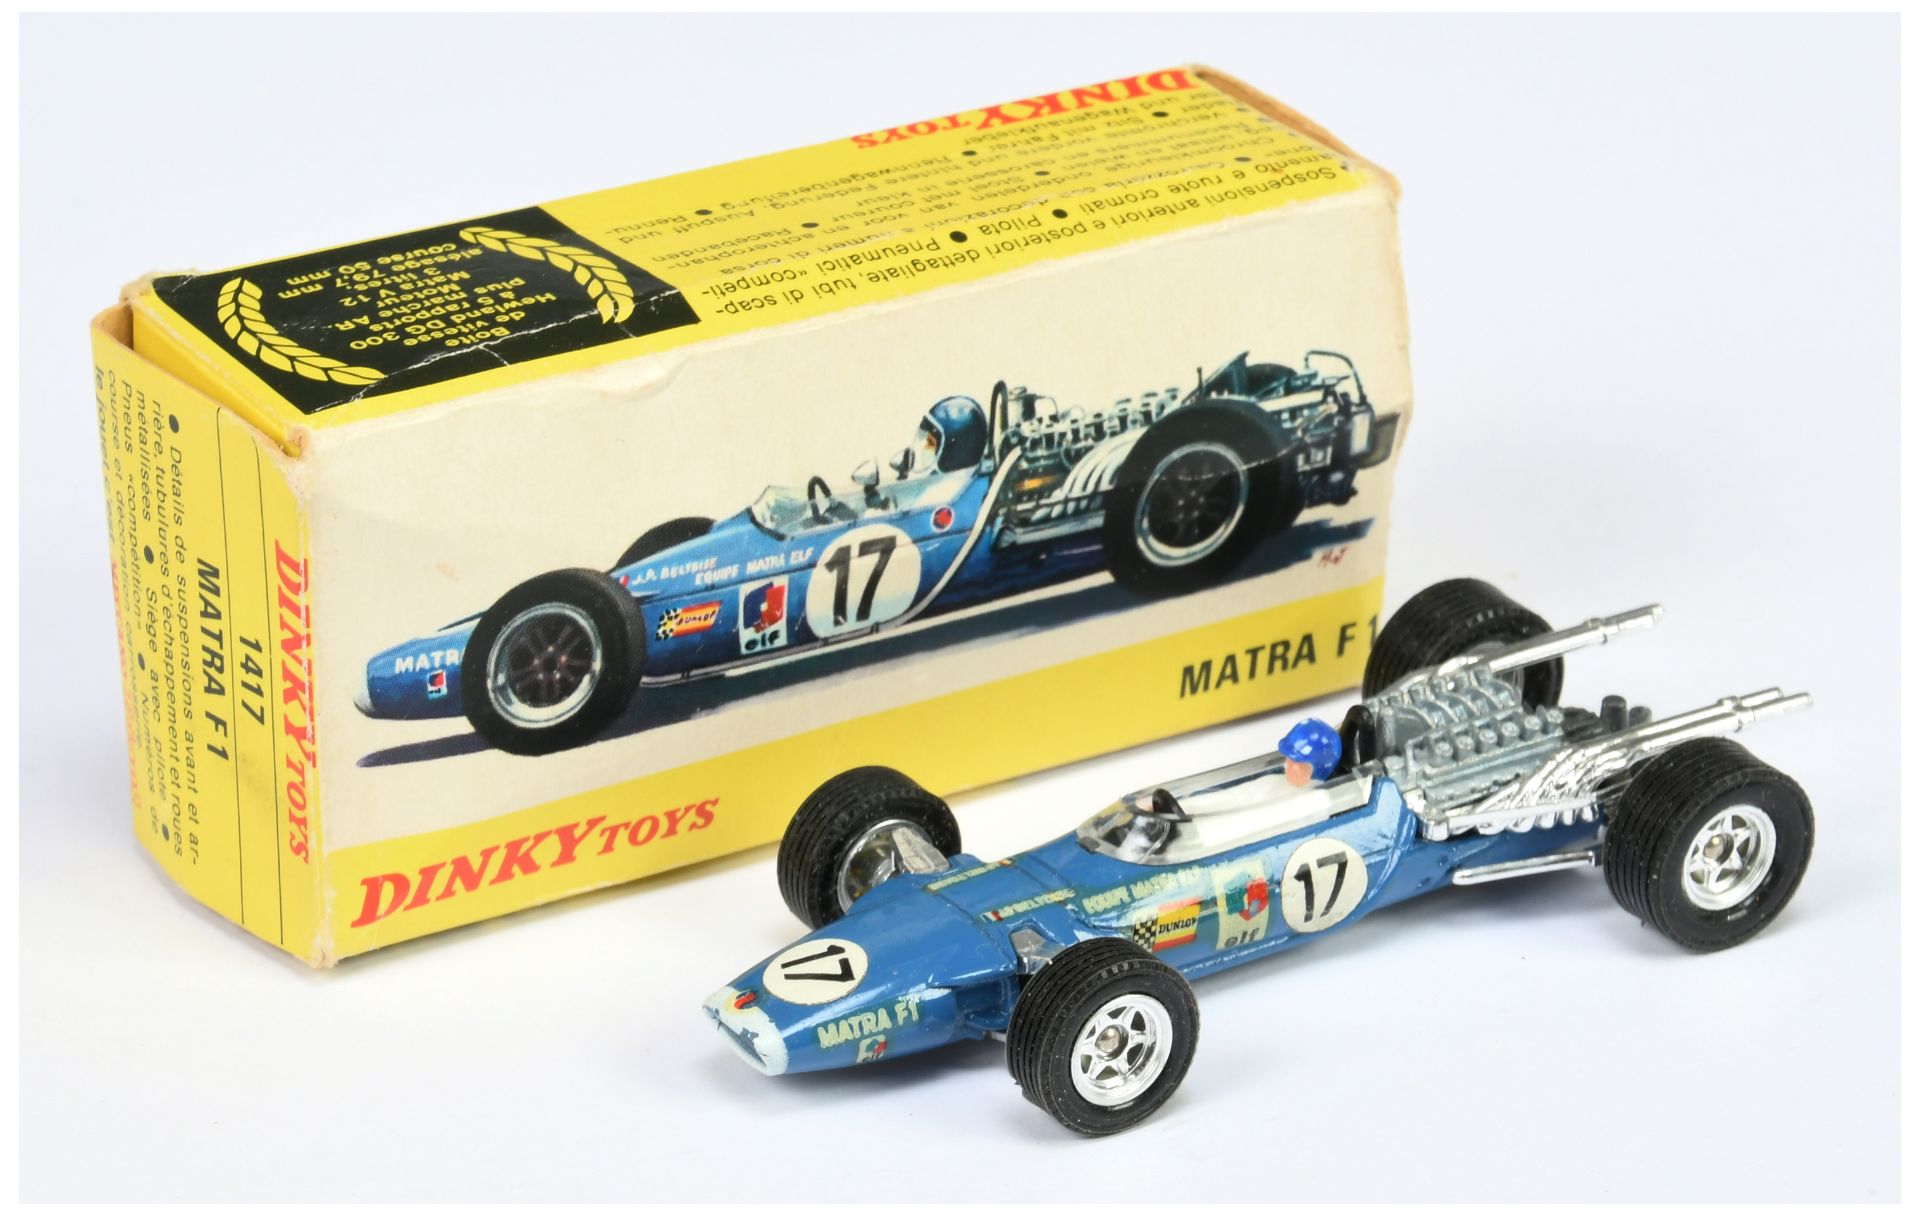 French Dinky Toys 1417 Matra F1 racing Car - Blue body, white front flash with decals applied